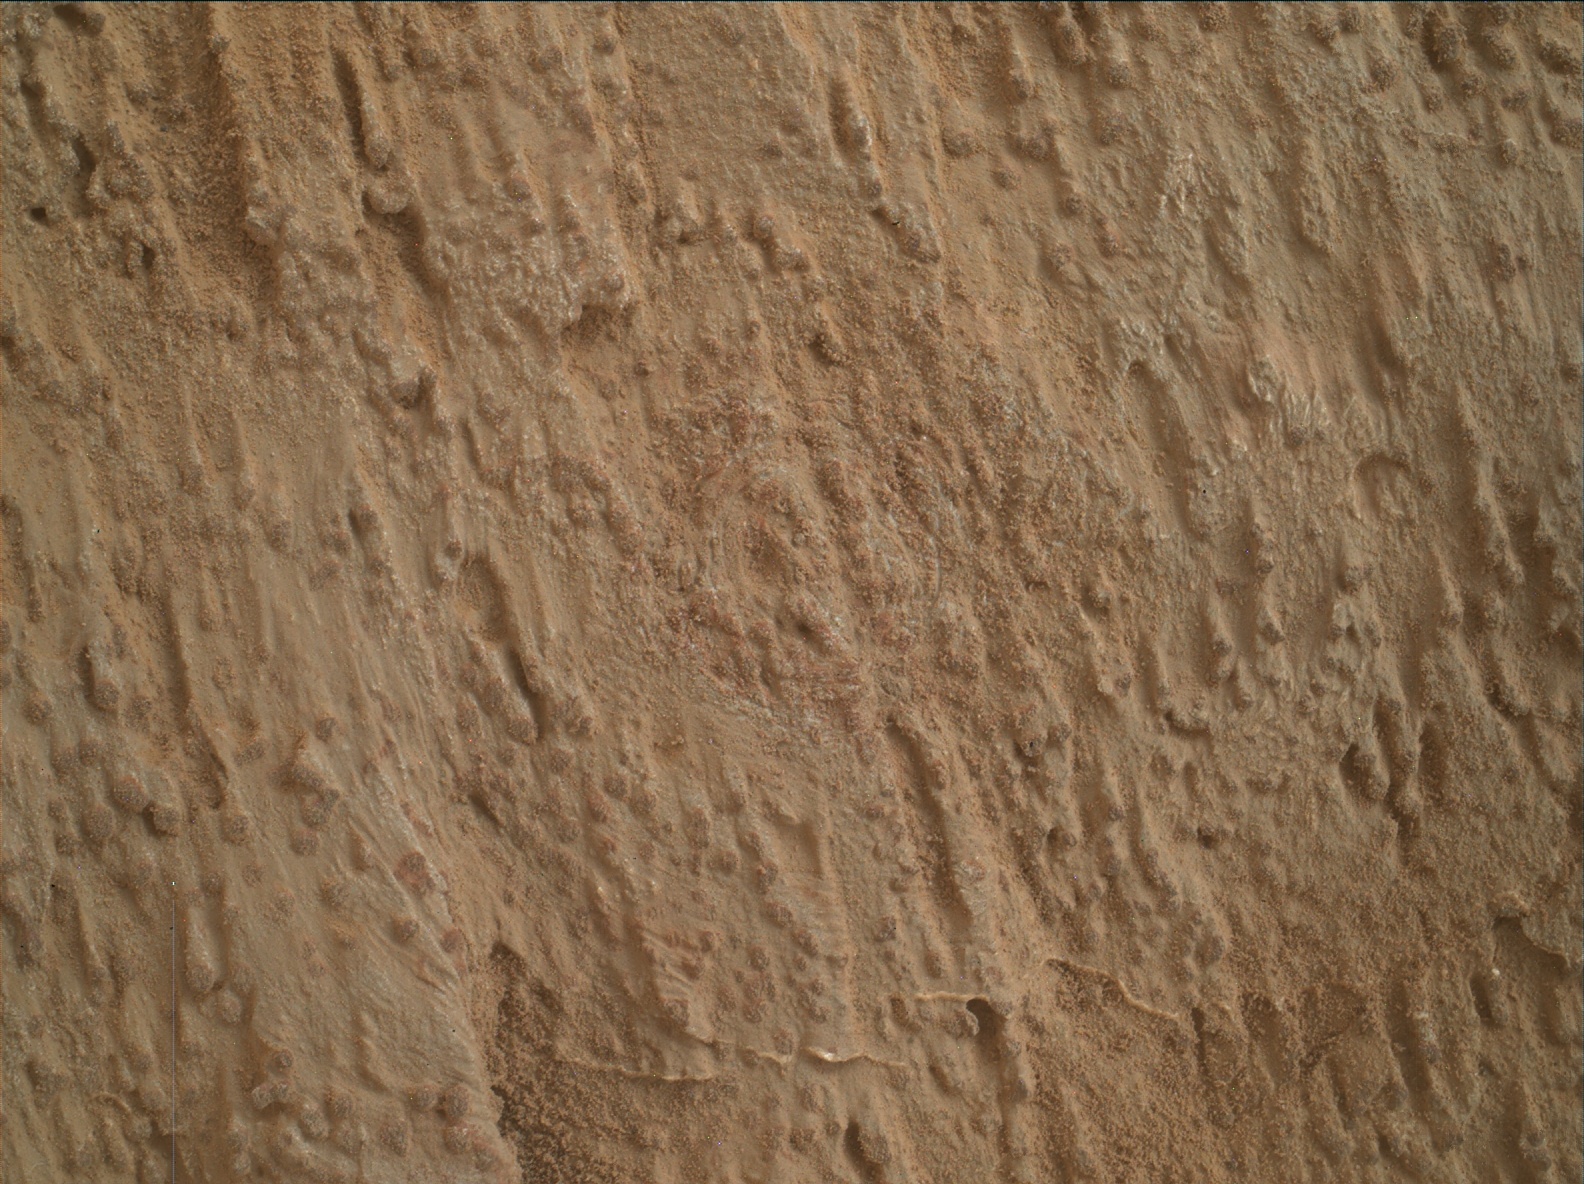 Nasa's Mars rover Curiosity acquired this image using its Mars Hand Lens Imager (MAHLI) on Sol 3322